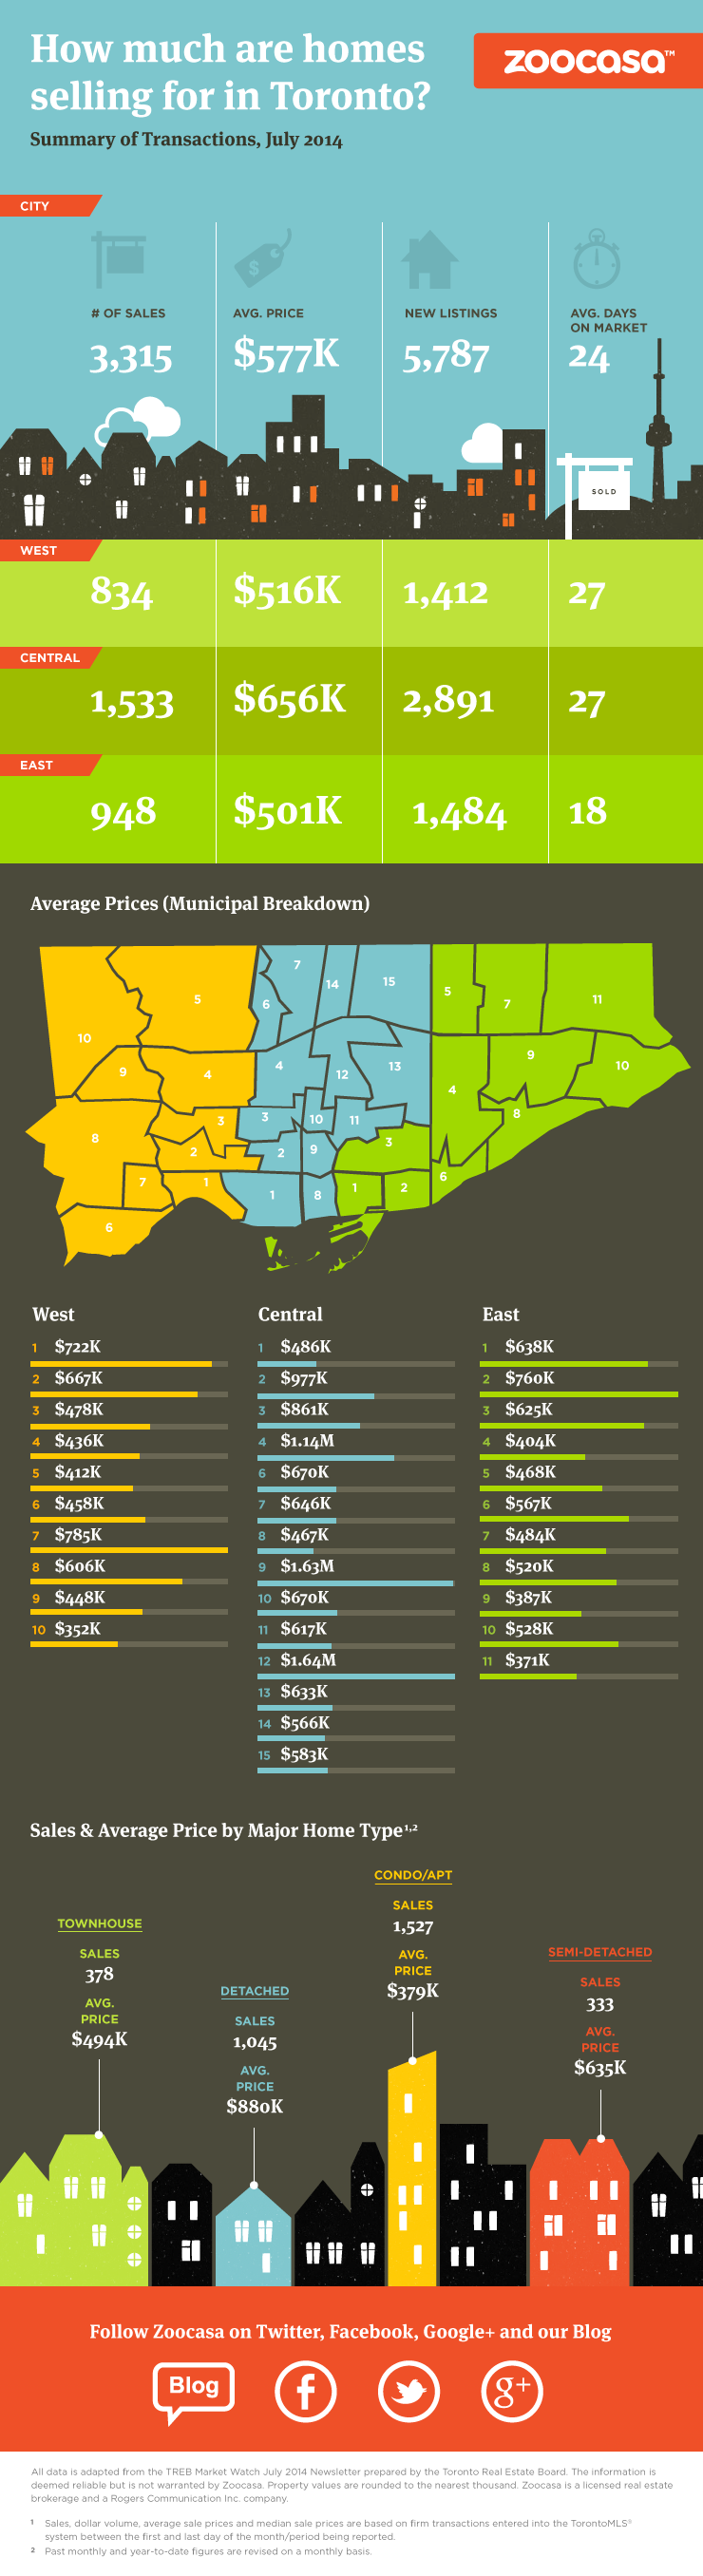 toronto-home-prices-july-2014-infographic